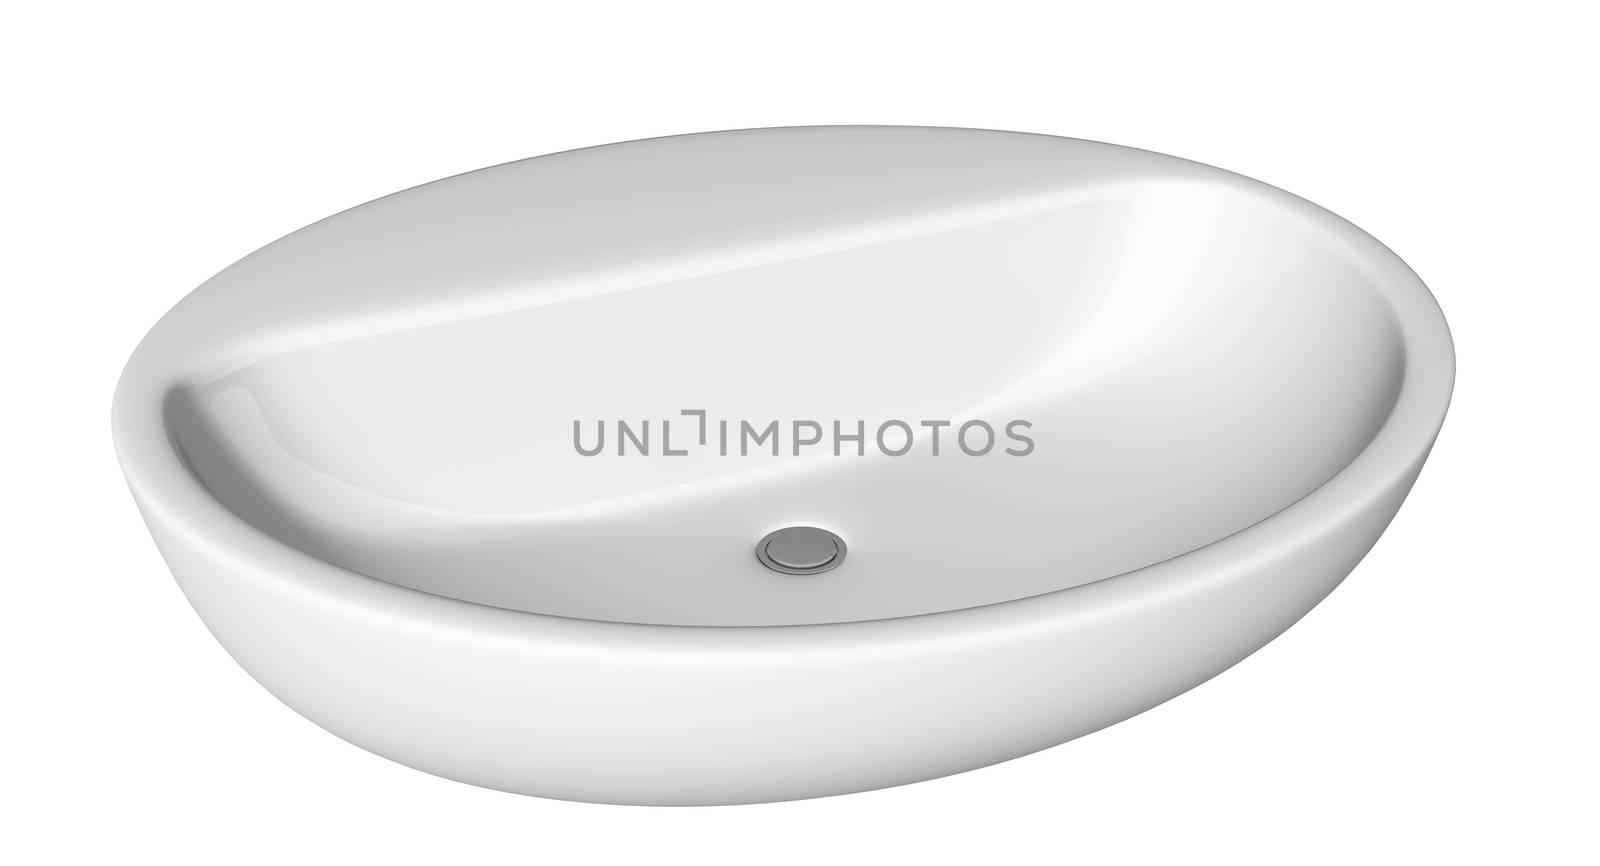 Egg-shapped and shallow washbasin or sink, isolated against a white background. by Morphart